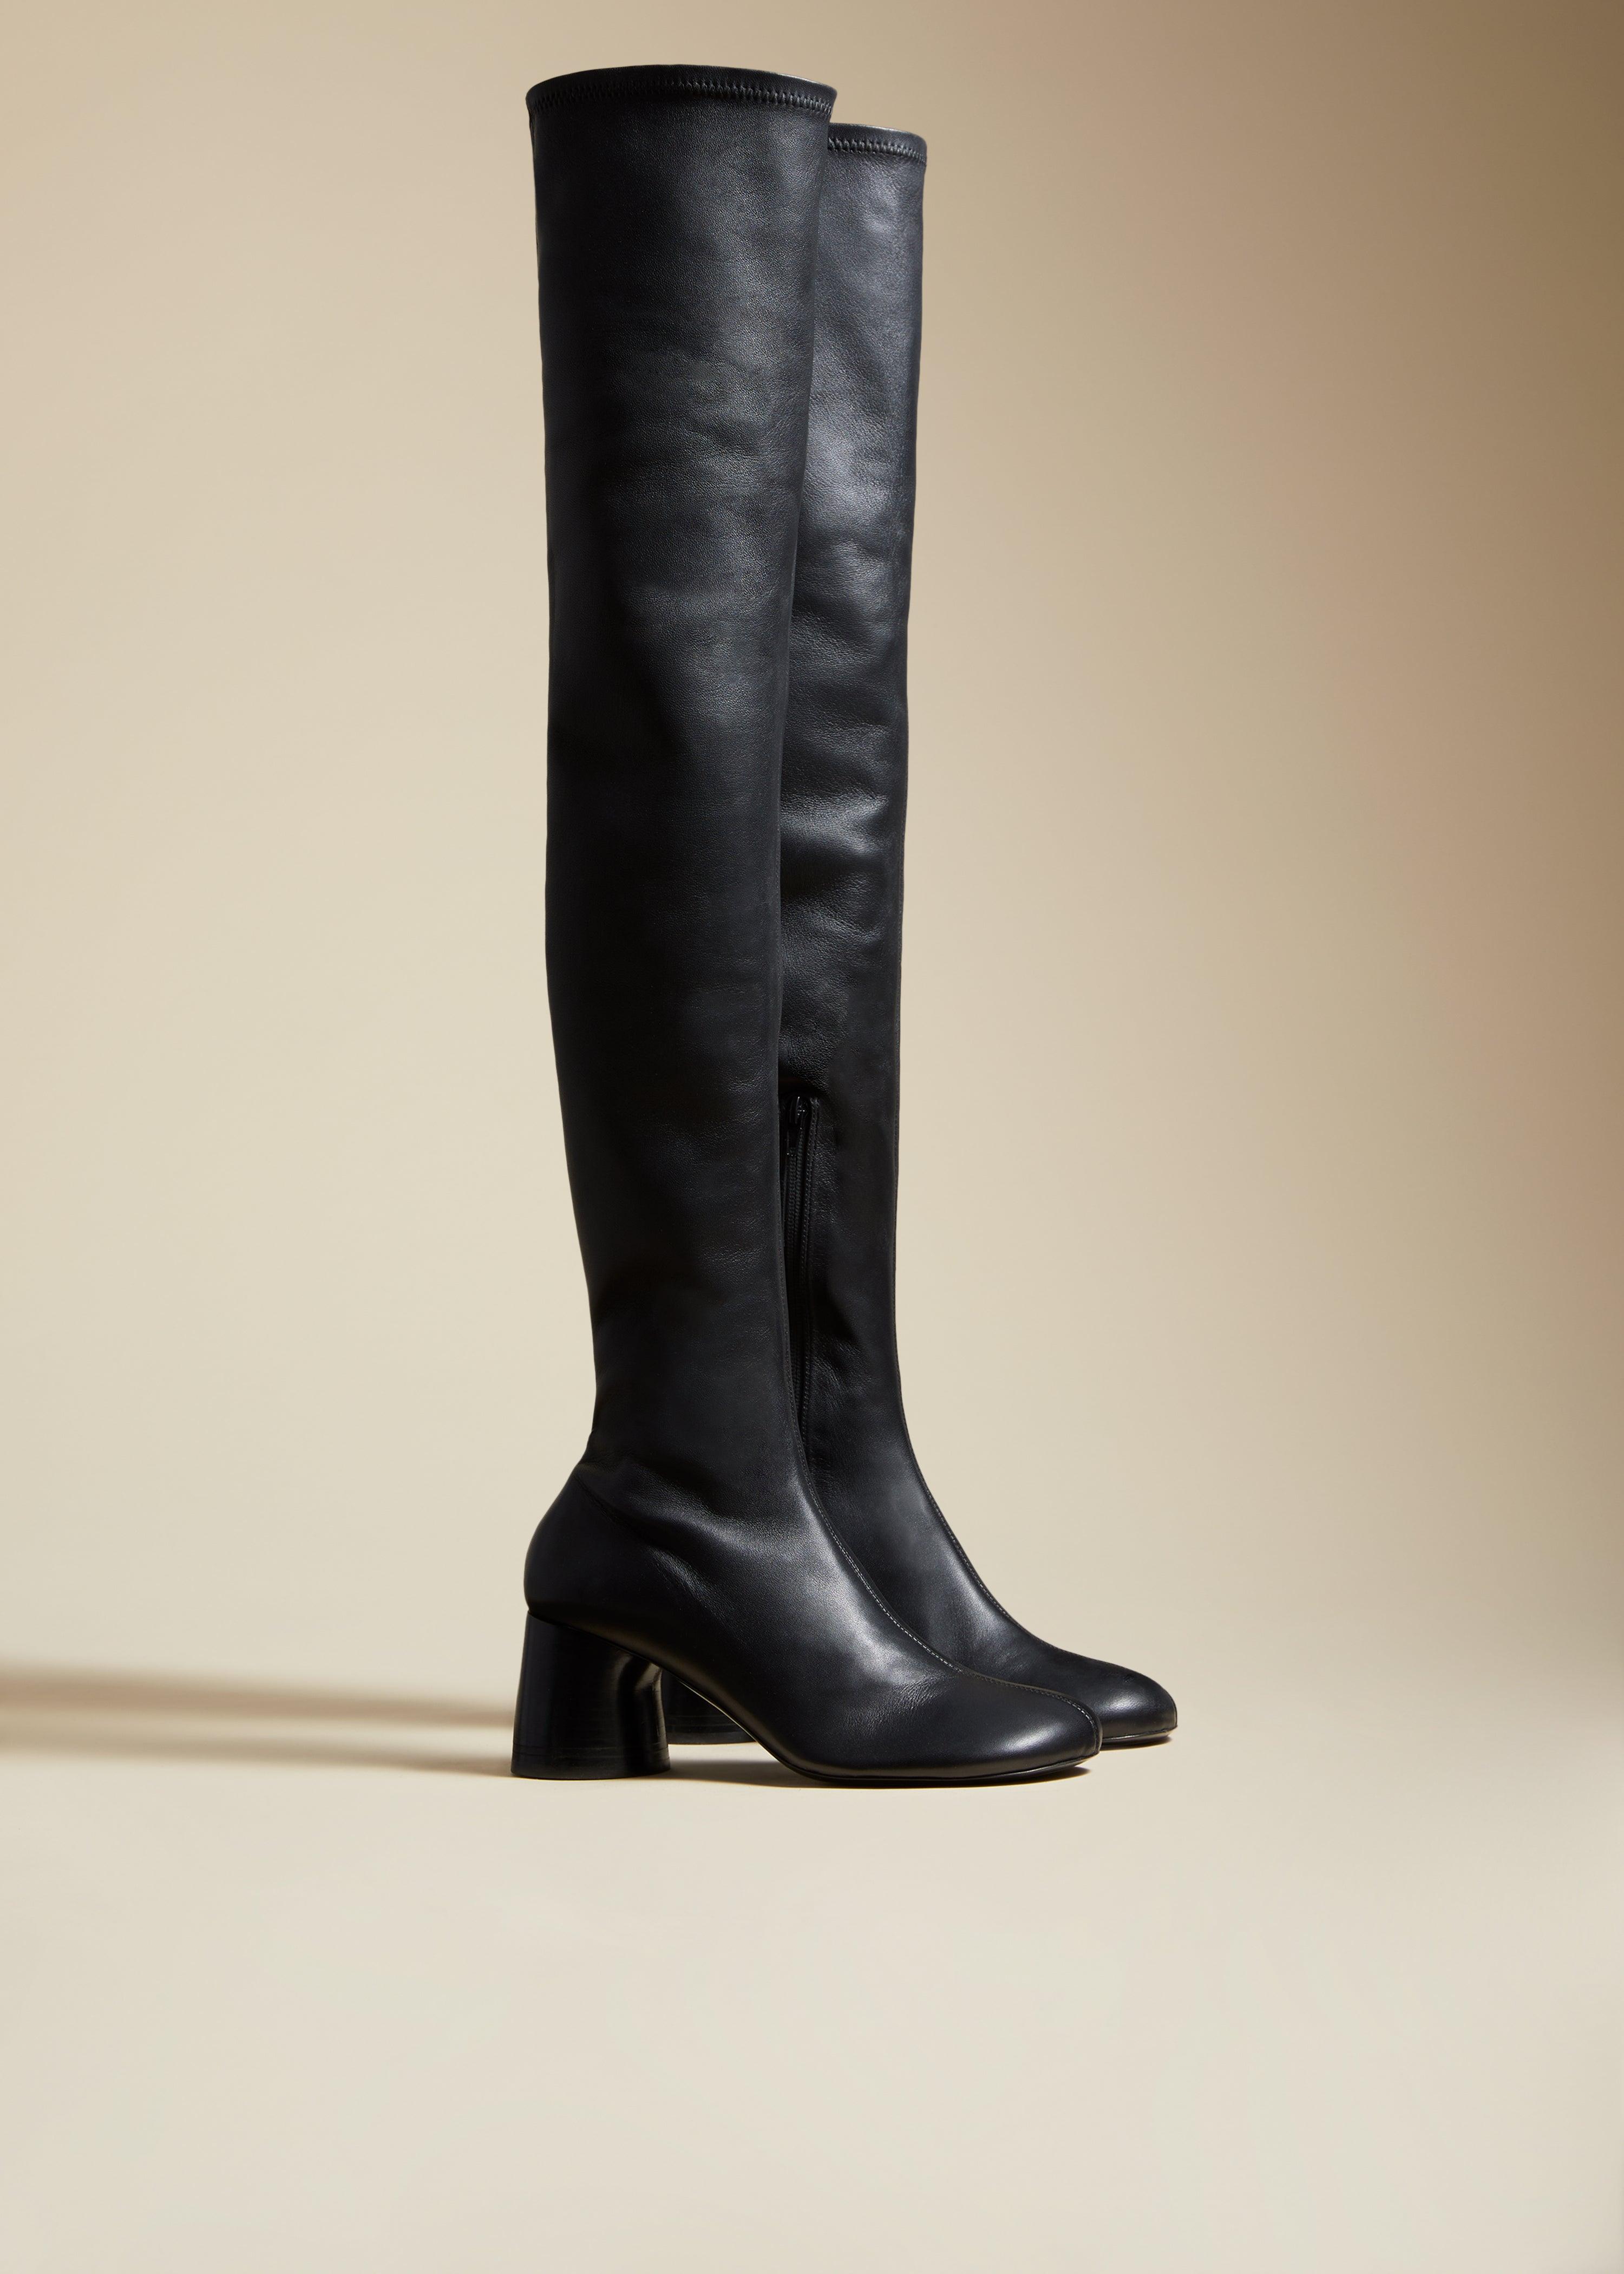 The Admiral Over-the-Knee Boot in Black Leather - The Iconic Issue